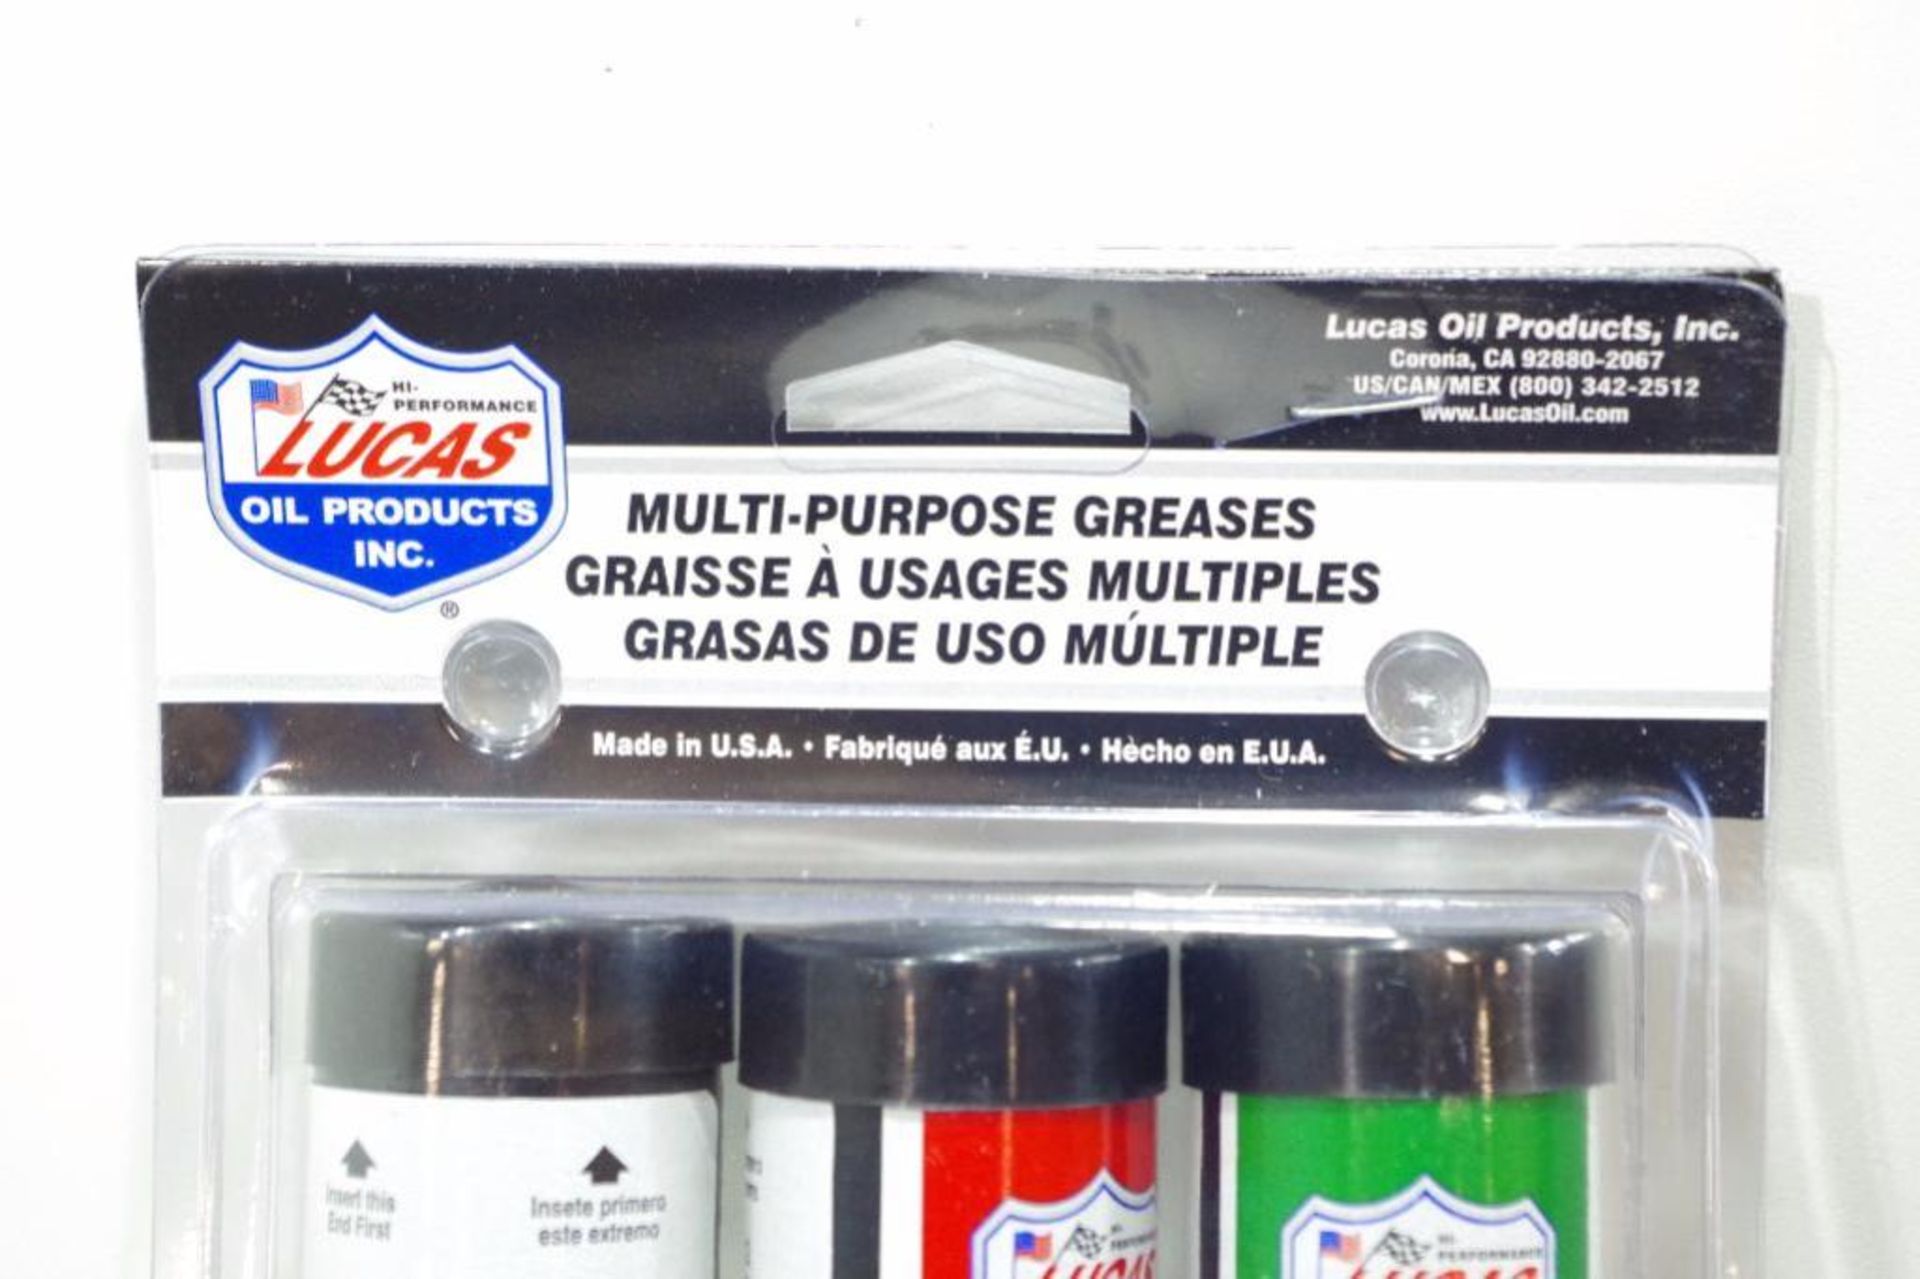 [40] LUCAS Grease 3-Packs, 3-Oz. Cylinders (4 Boxes w/ Ten 3-Packs Each) - Image 3 of 6